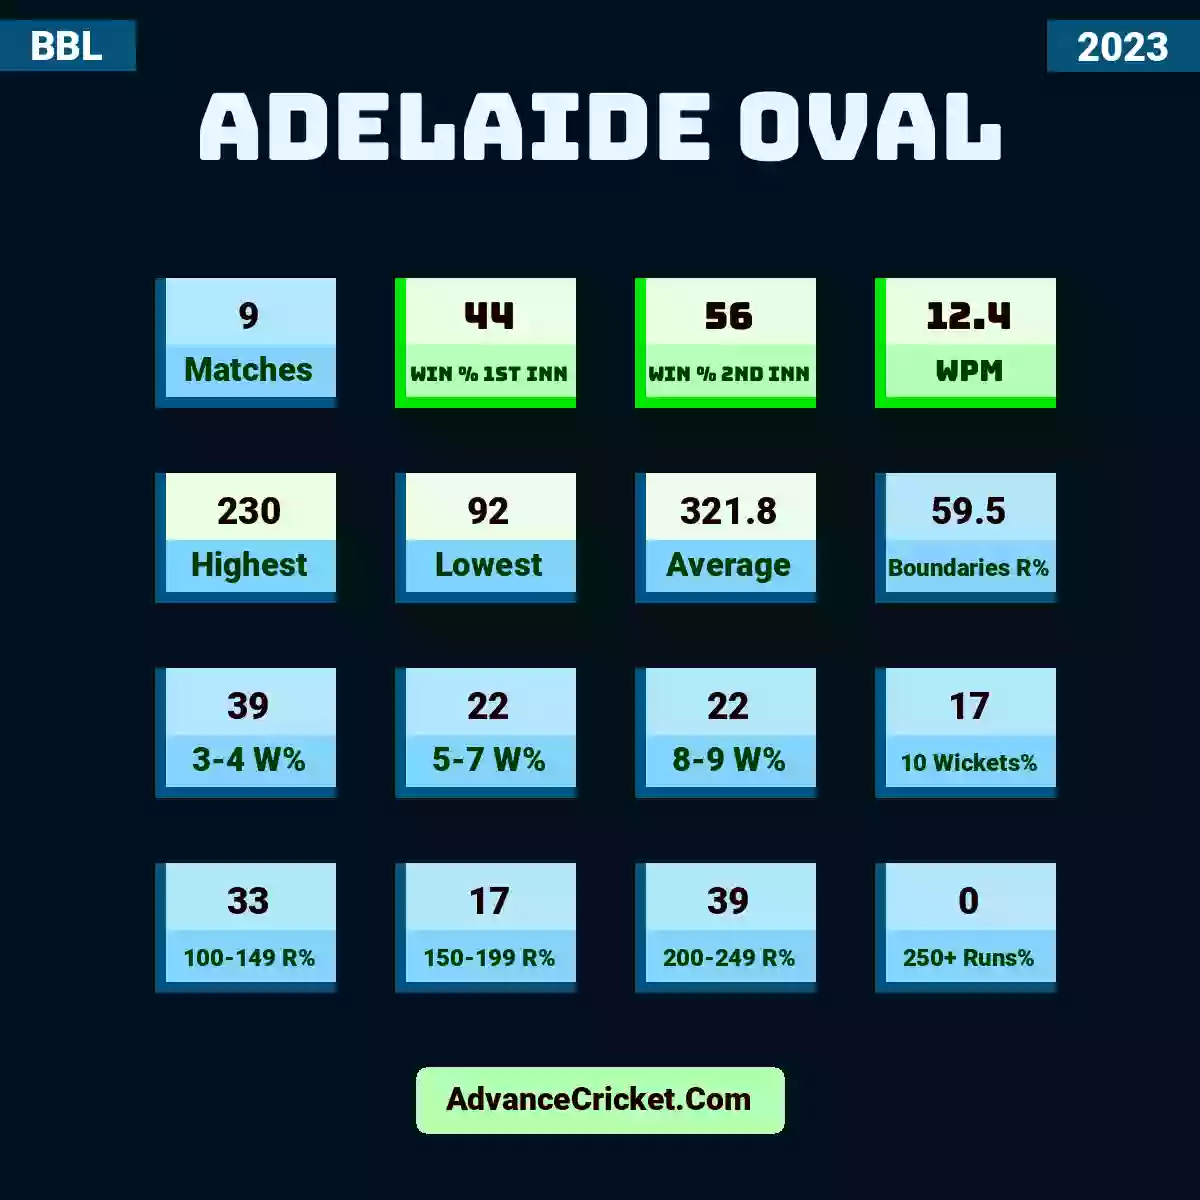 Image showing Adelaide Oval with Matches: 9, Win % 1st Inn: 44, Win % 2nd Inn: 56, WPM: 12.4, Highest: 230, Lowest: 92, Average: 321.8, Boundaries R%: 59.5, 3-4 W%: 39, 5-7 W%: 22, 8-9 W%: 22, 10 Wickets%: 17, 100-149 R%: 33, 150-199 R%: 17, 200-249 R%: 39, 250+ Runs%: 0.